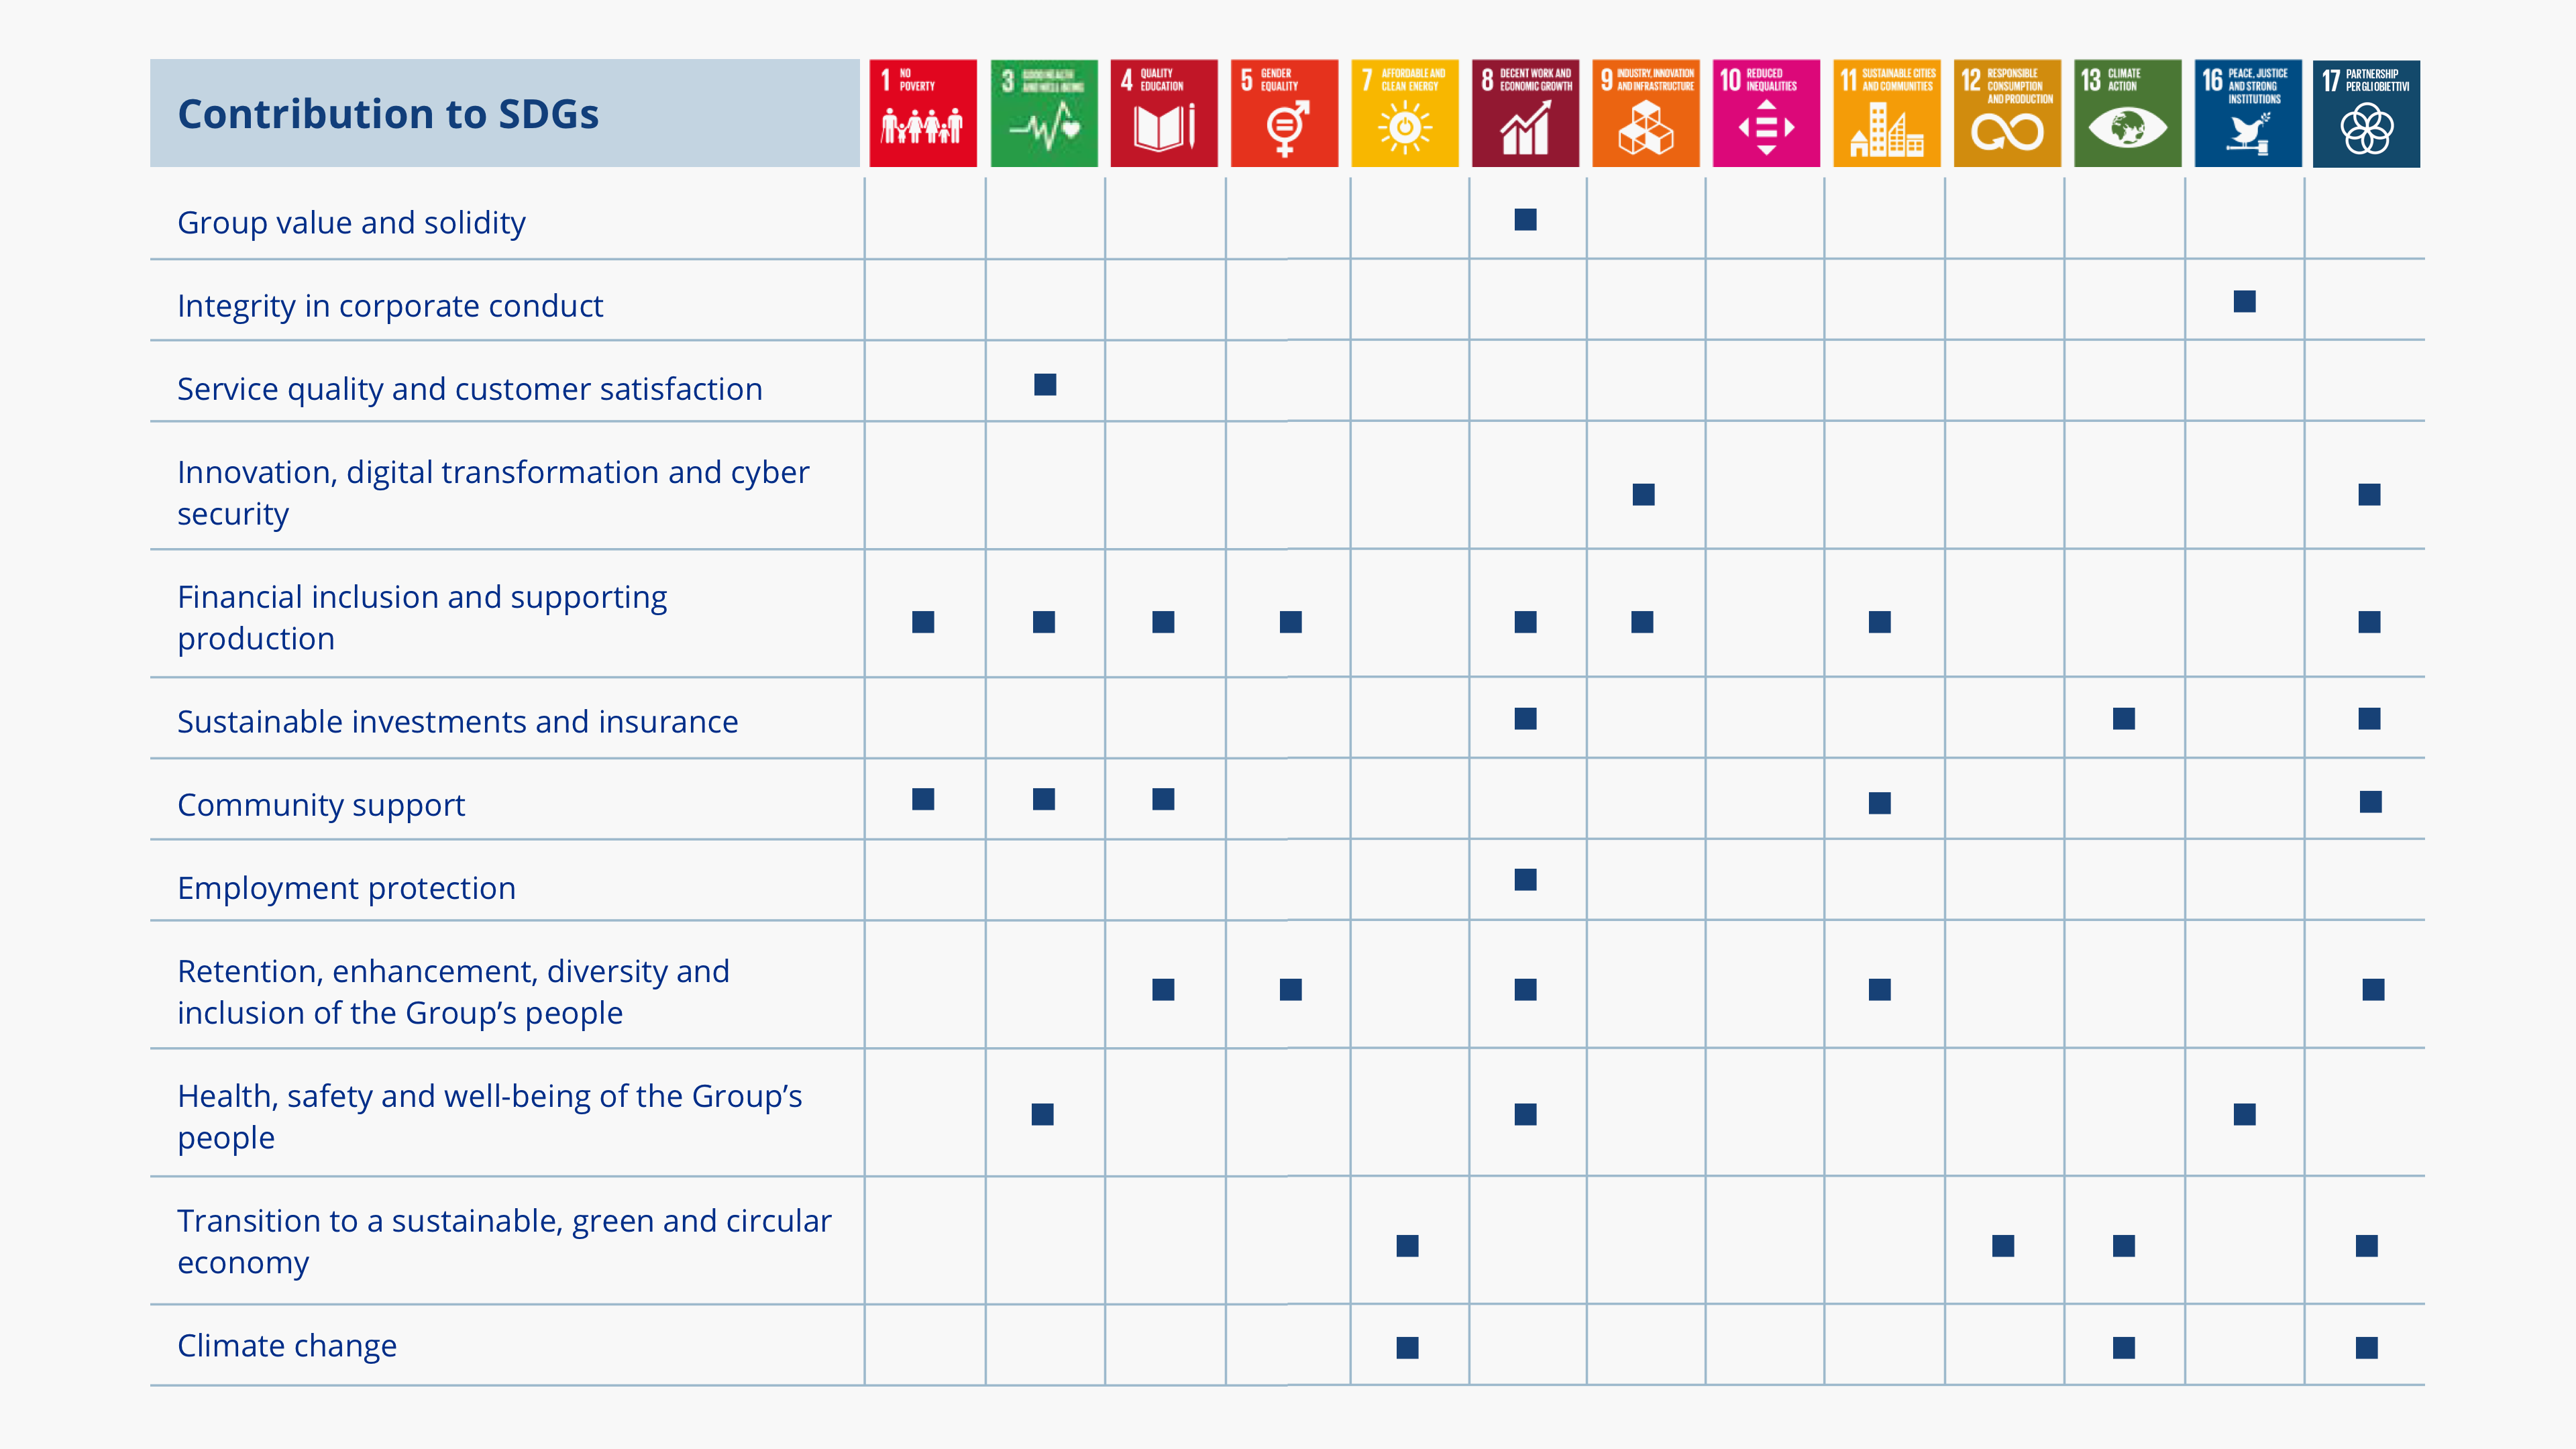 Link between SDGs and materiality matrix